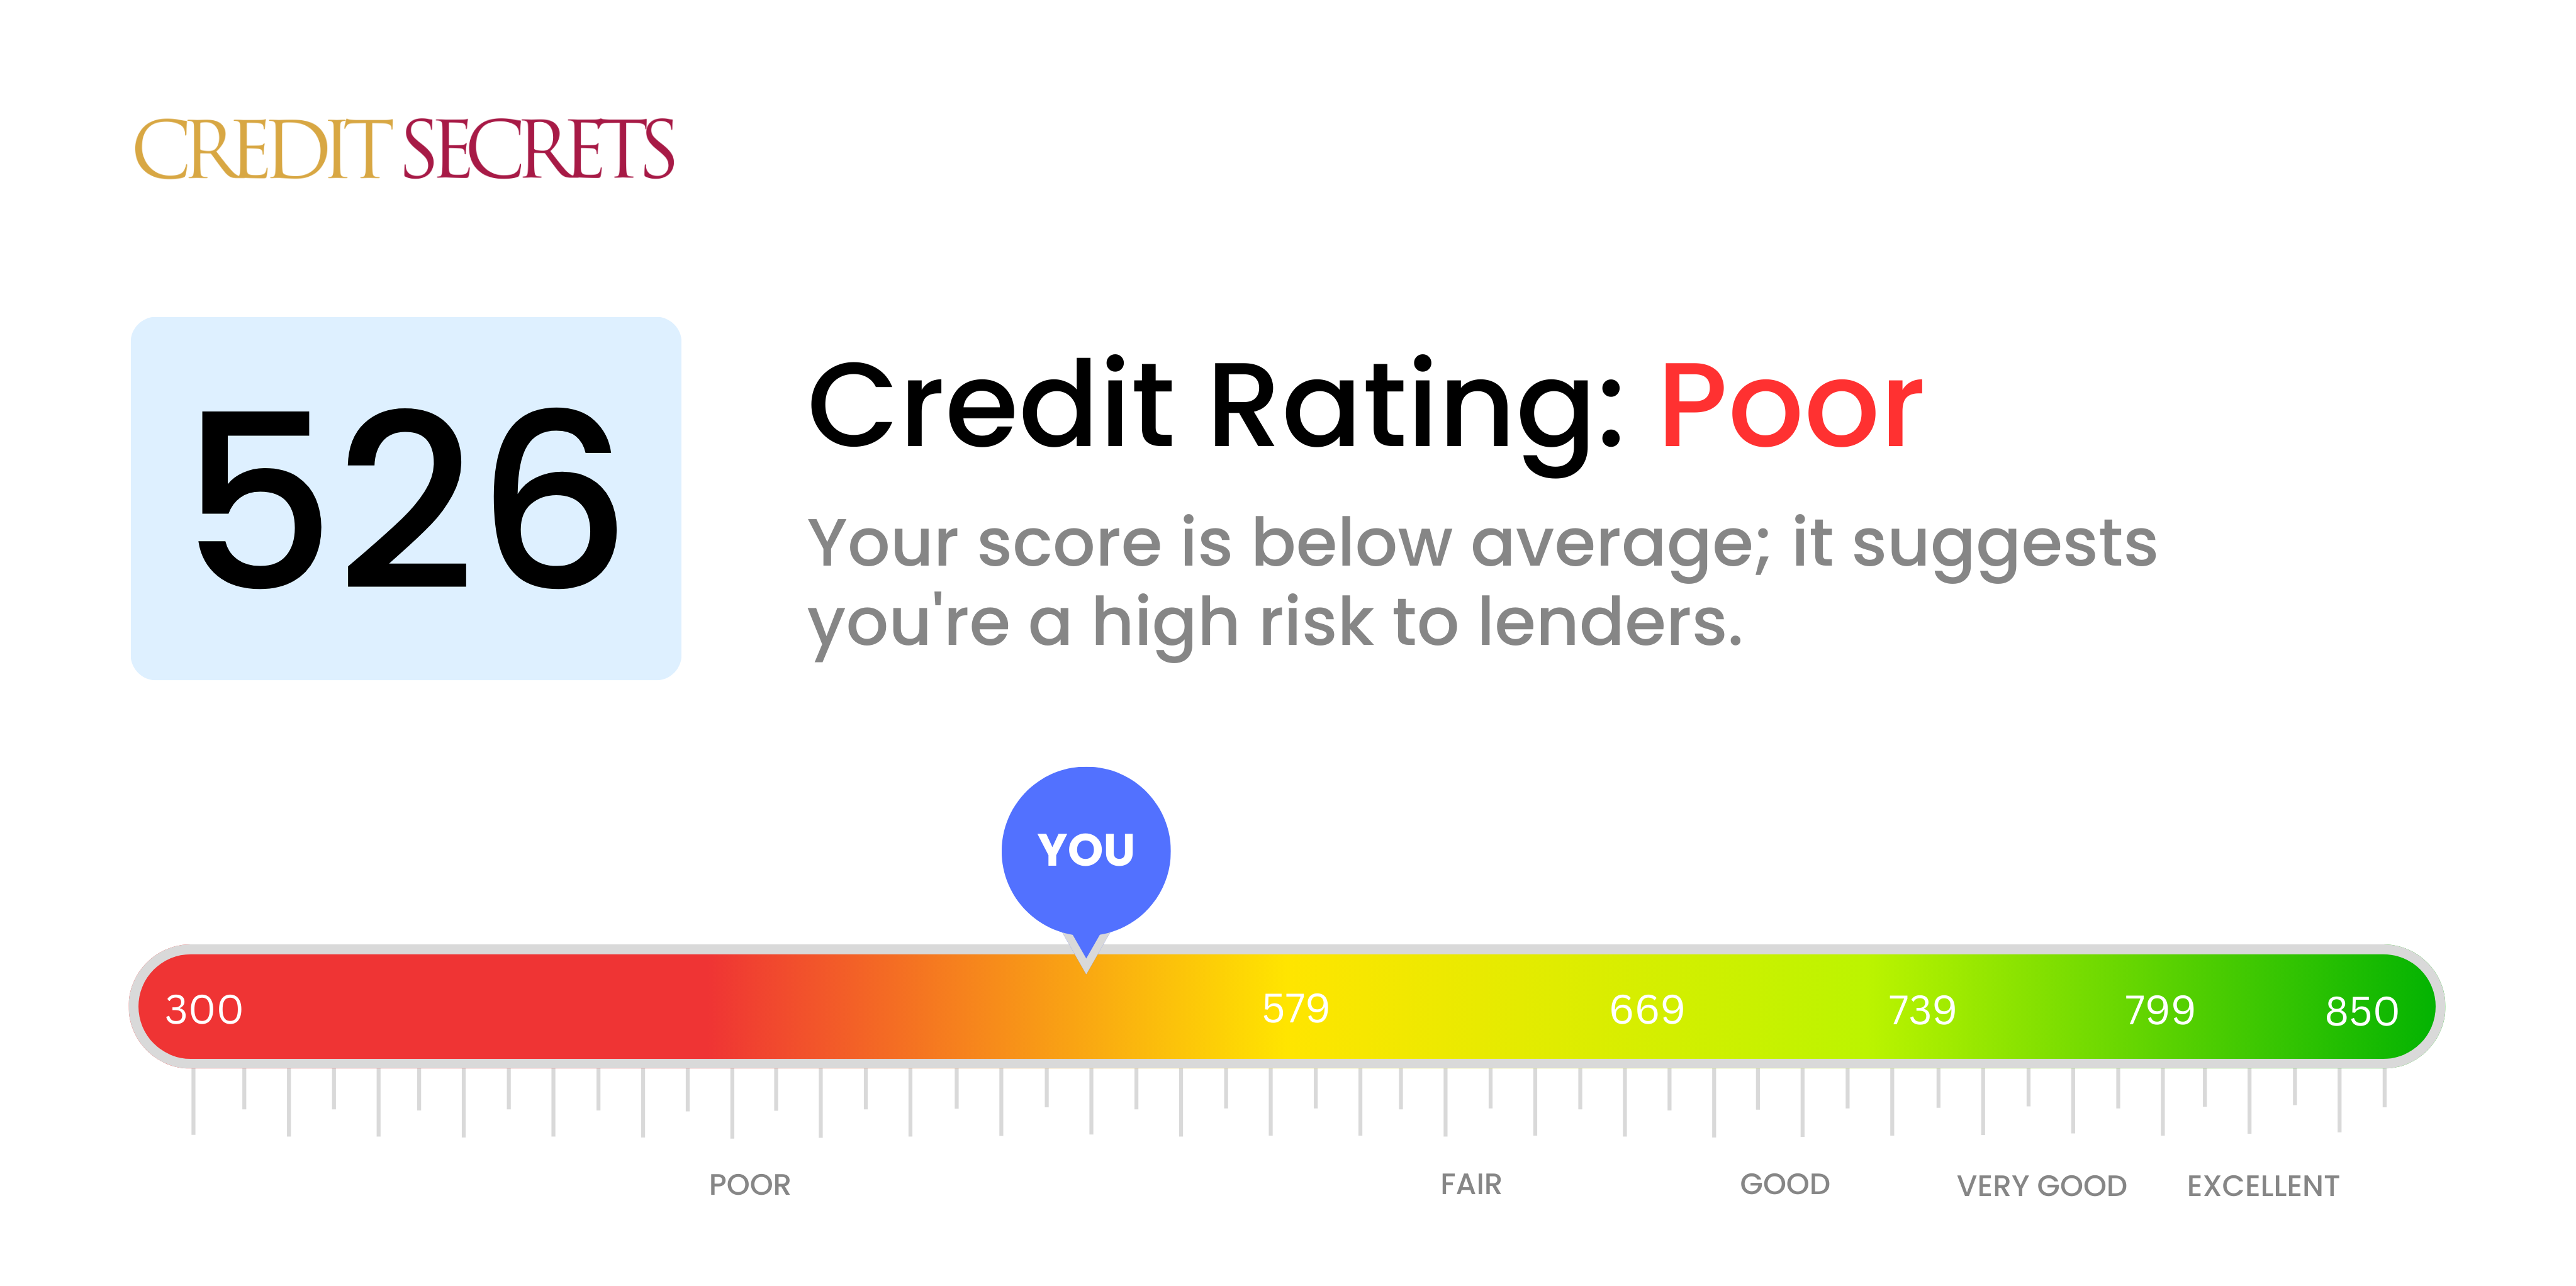 Is 526 a good credit score?